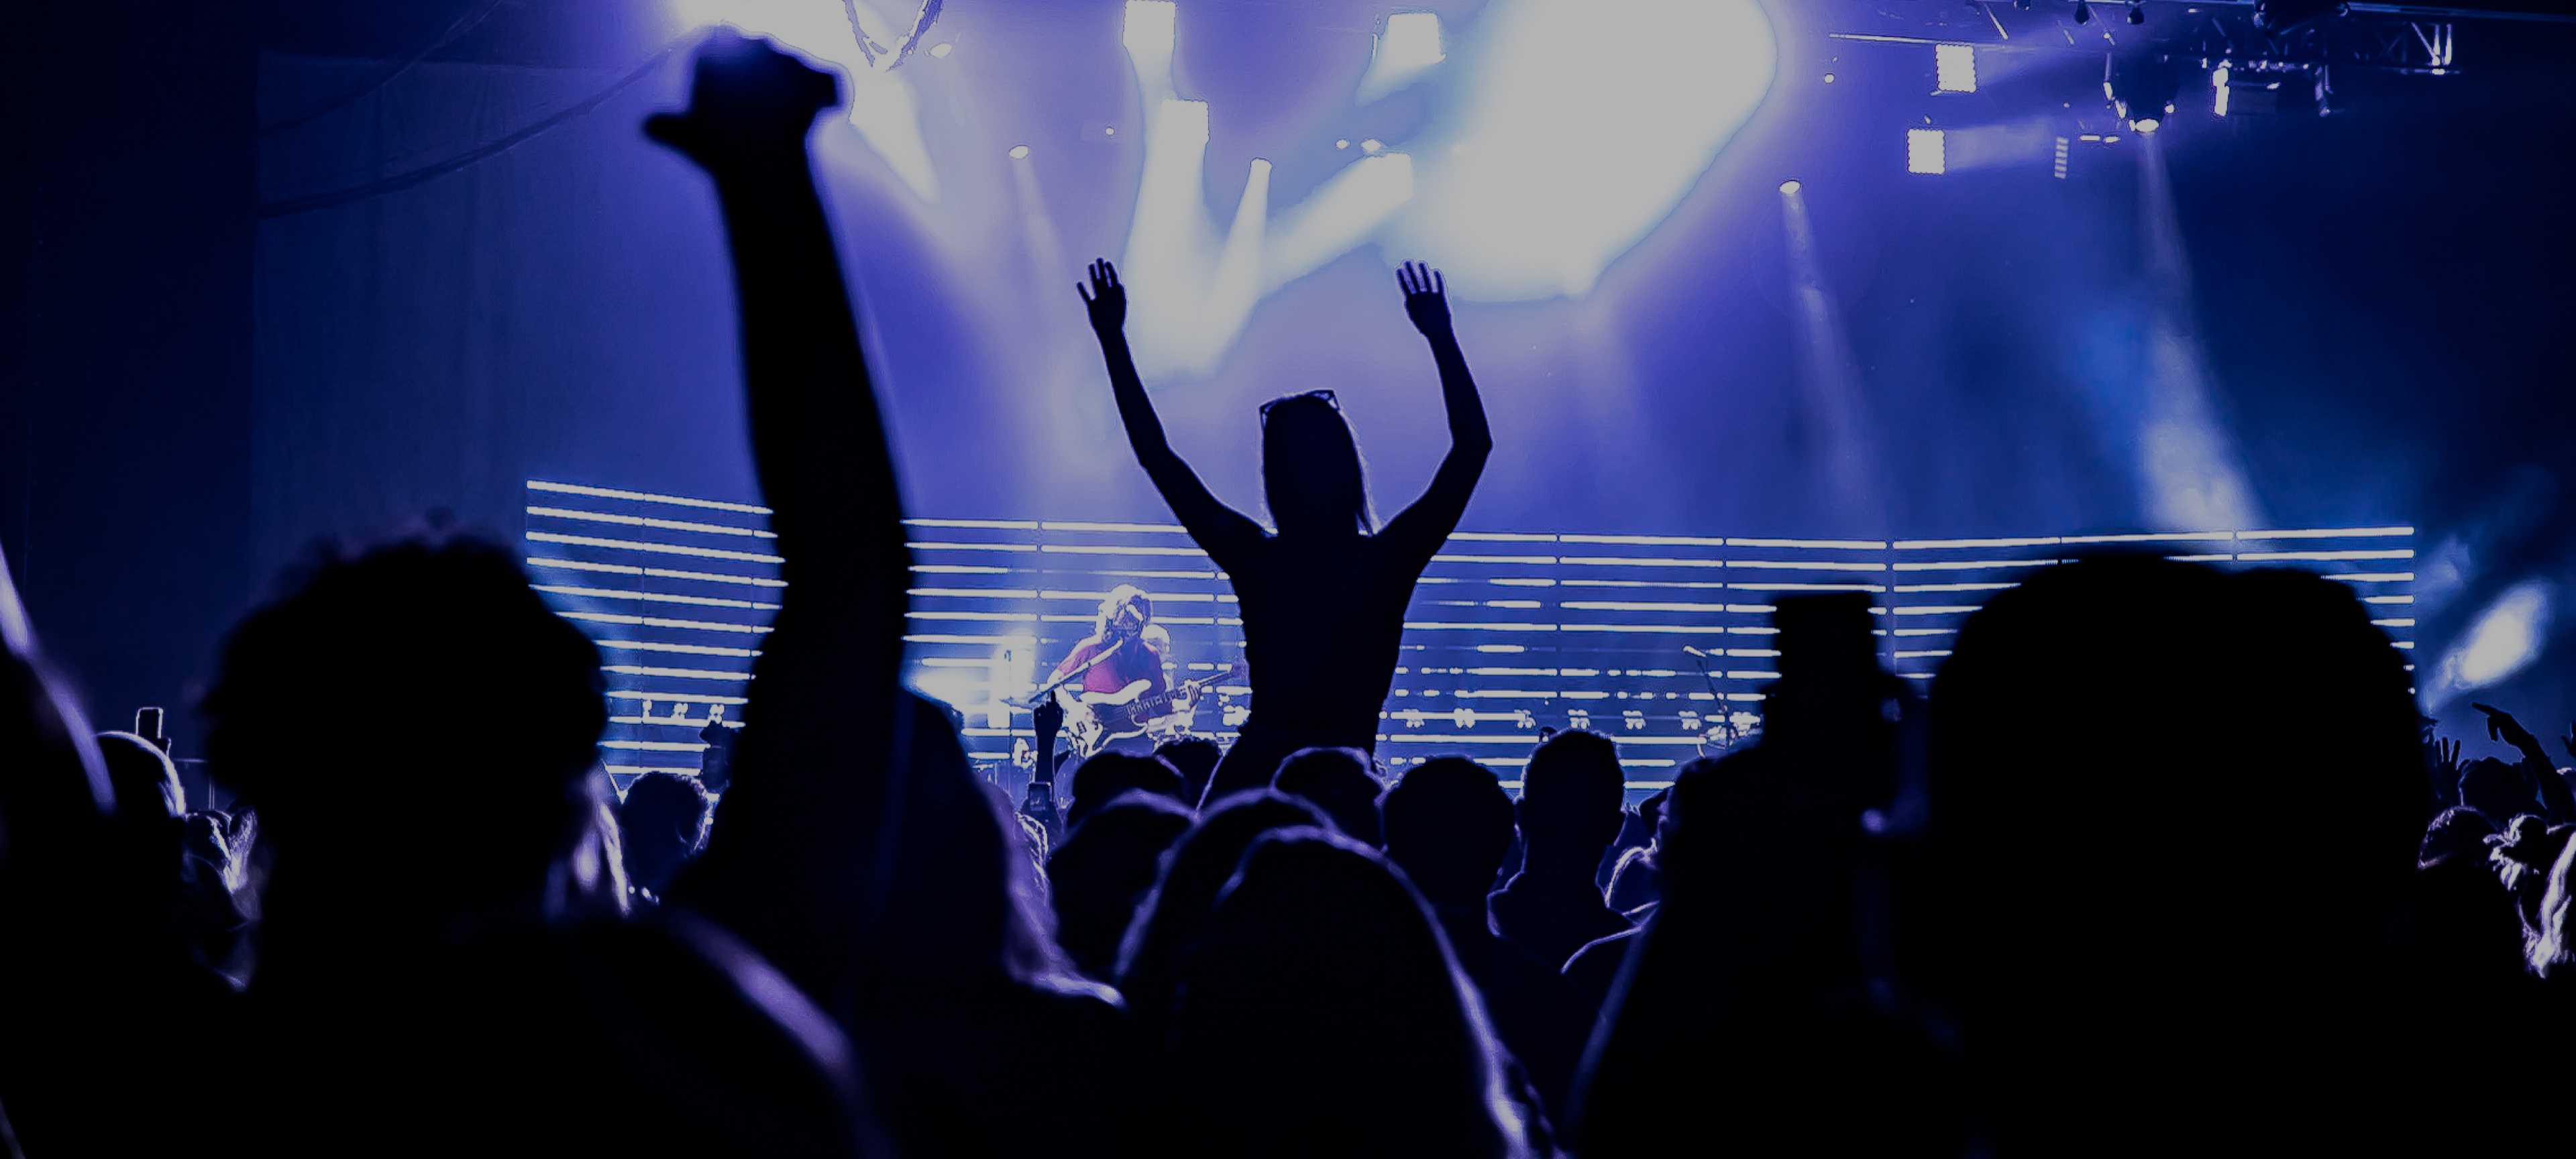 Creating a new online experience for a Sydney live music institution